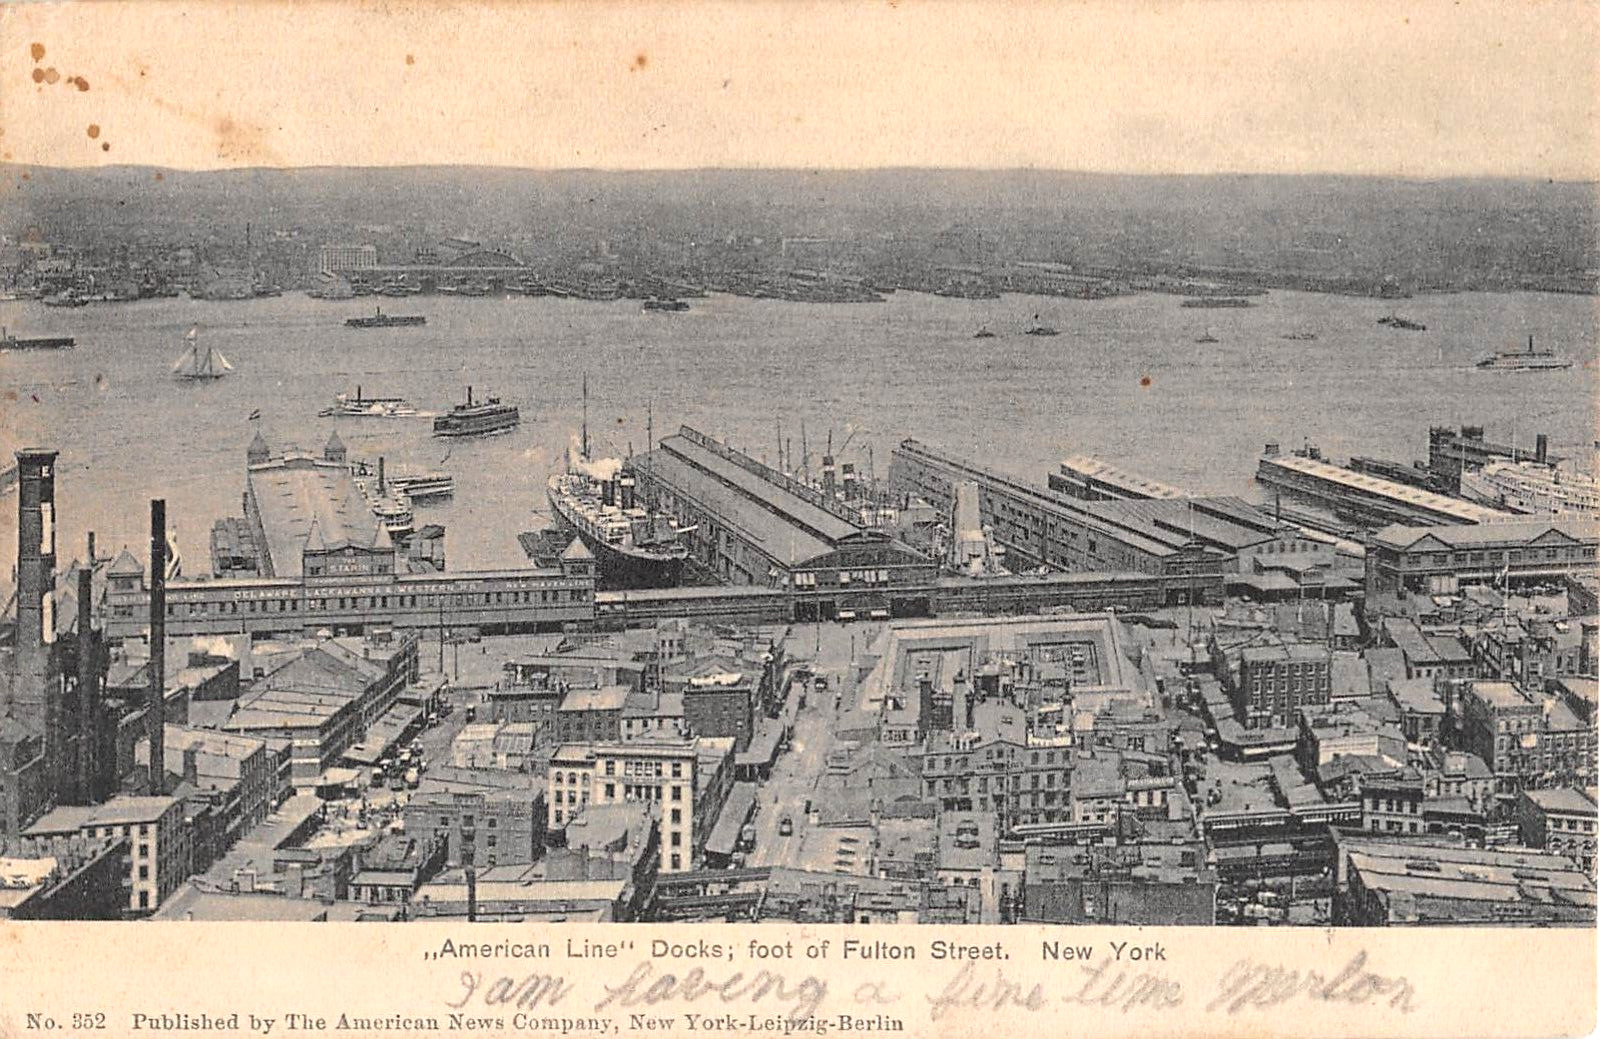 1906 Aerial View American Lines Docks Foot of Fulton St. Manhattan NY post card